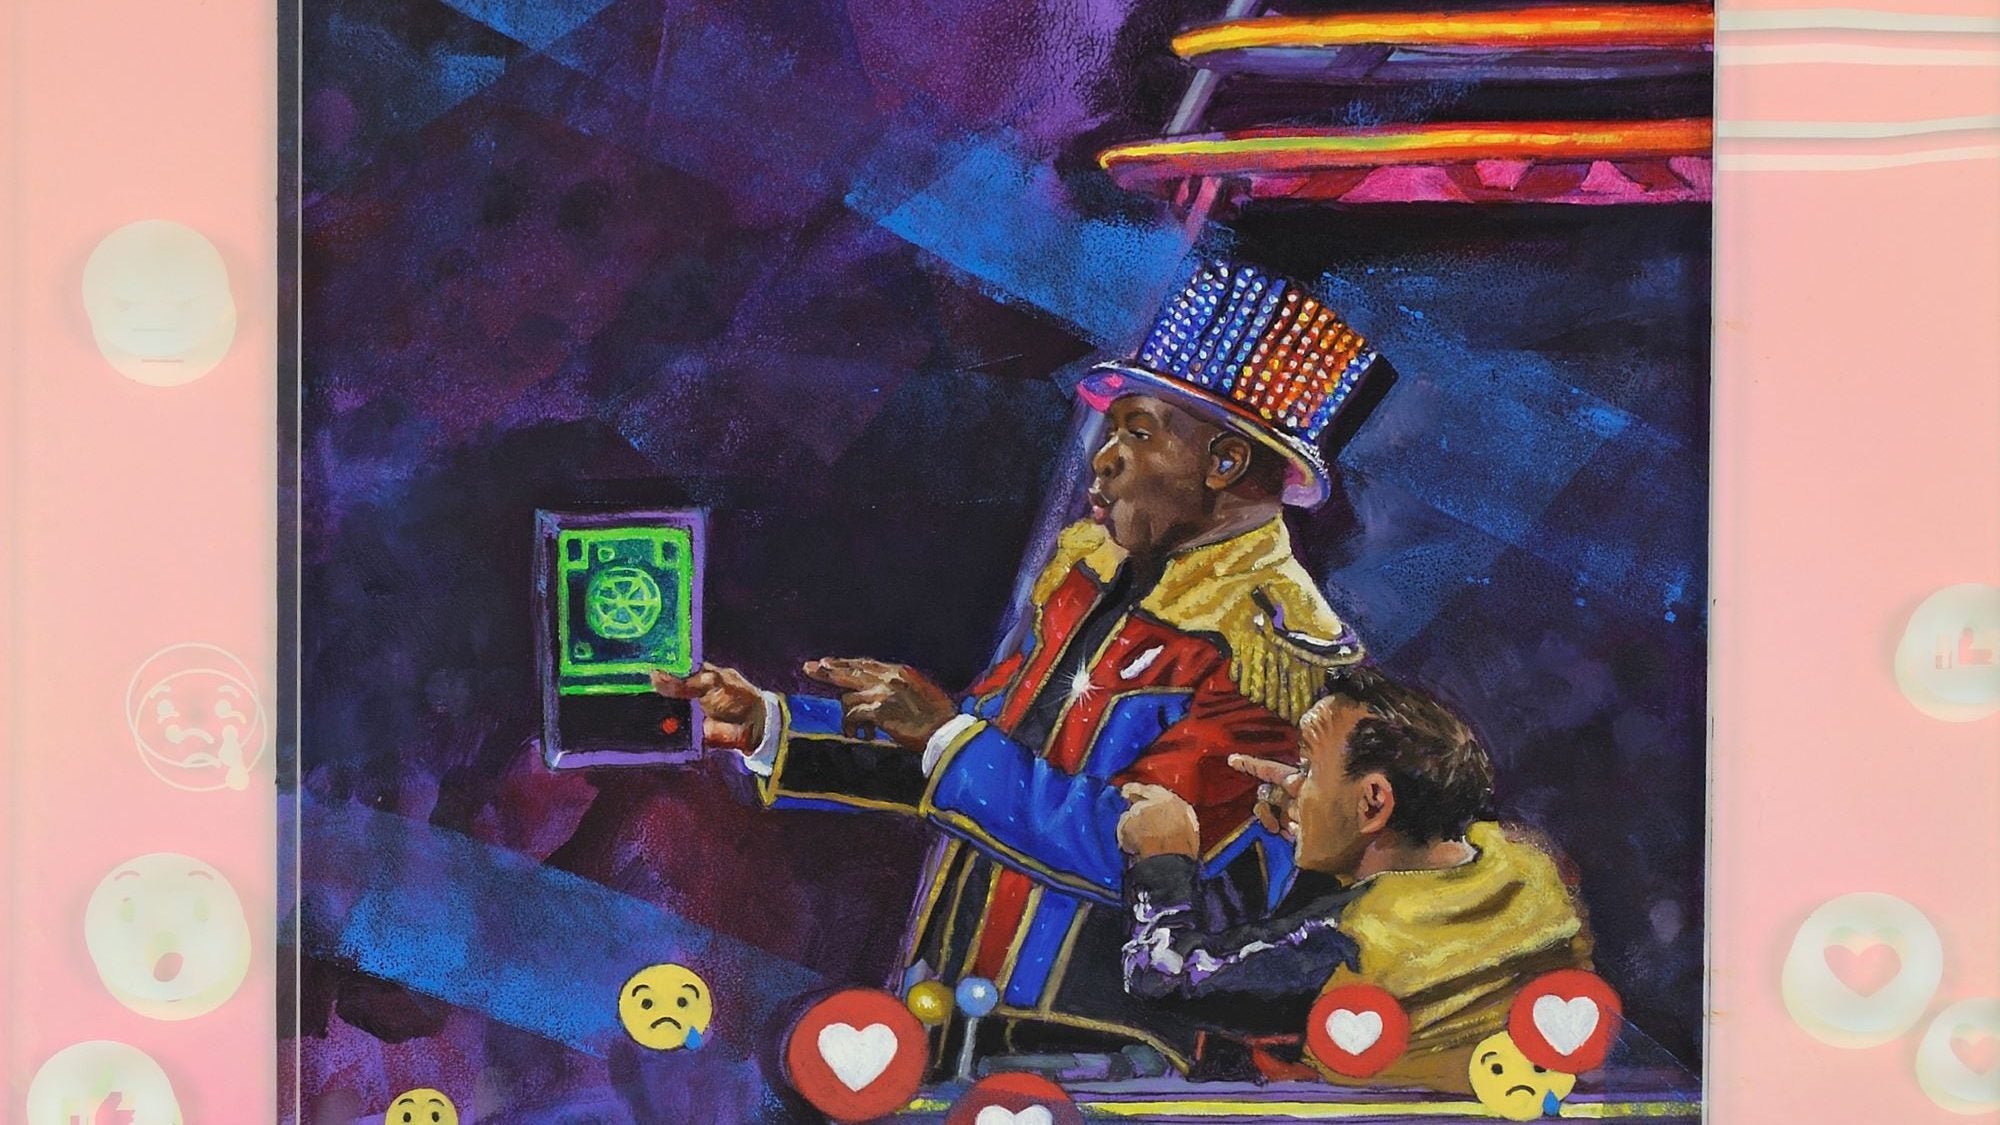 In the middle of the painting, there is a drawing of a circus ringmaster wearing flashy clothes (a colorful tailcoat jacket and a bright top hat). He is pointing to something that looks like a technological device that he is holding with his other hand. Next to him is another circus character, holding his left arm, also pointing to the device. The device is a black rectangle, with a green square in its center, that, itself, has a green circle divided in six equal portions in the middle. The circus image has a pink frame, with common Facebook reactions: heart icon, sad face, like icon, surprised face.